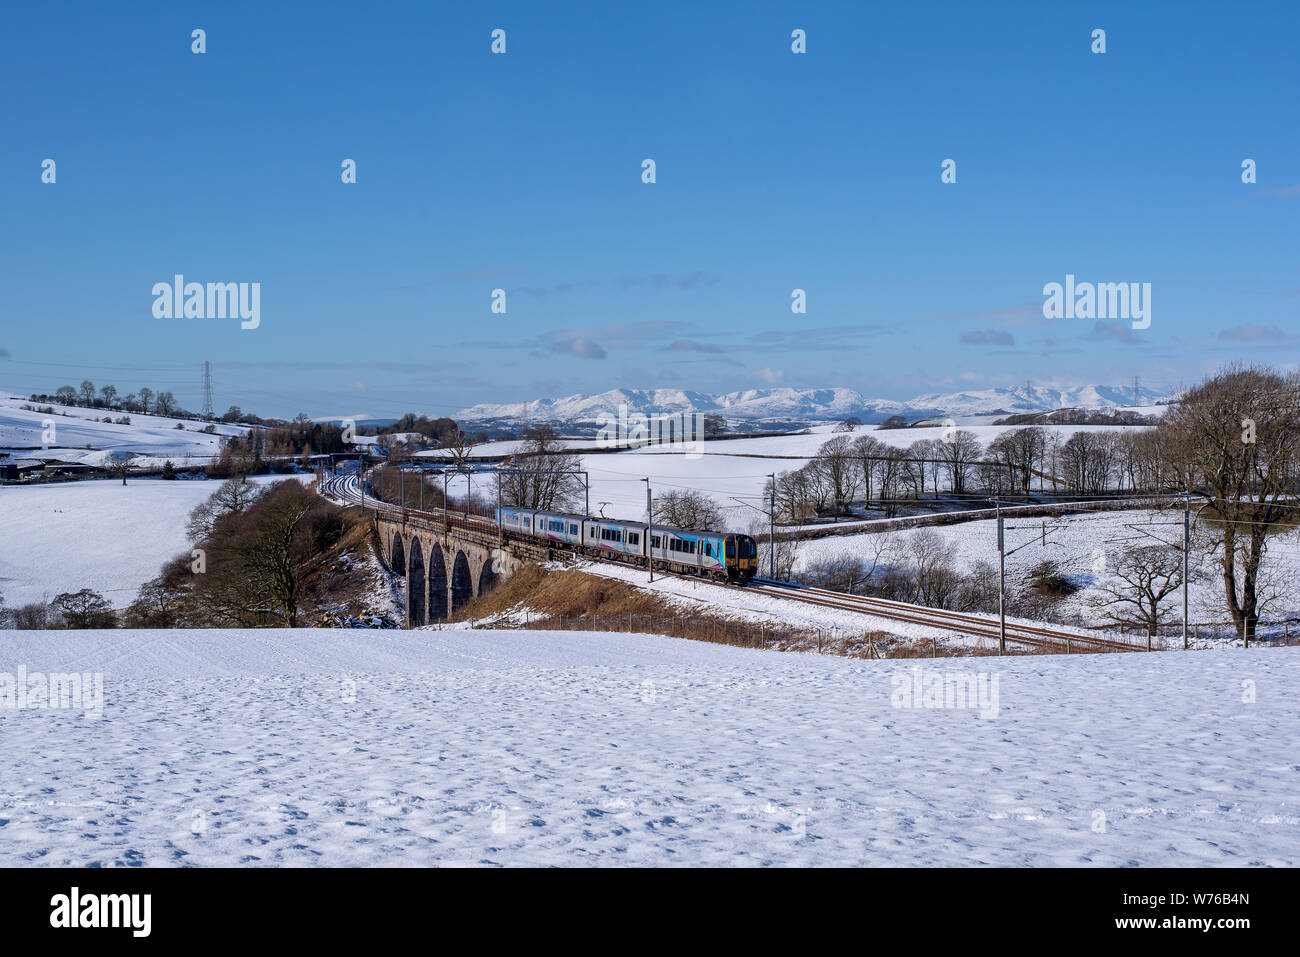 A winter scene at Docker on the WCLM Stock Photo